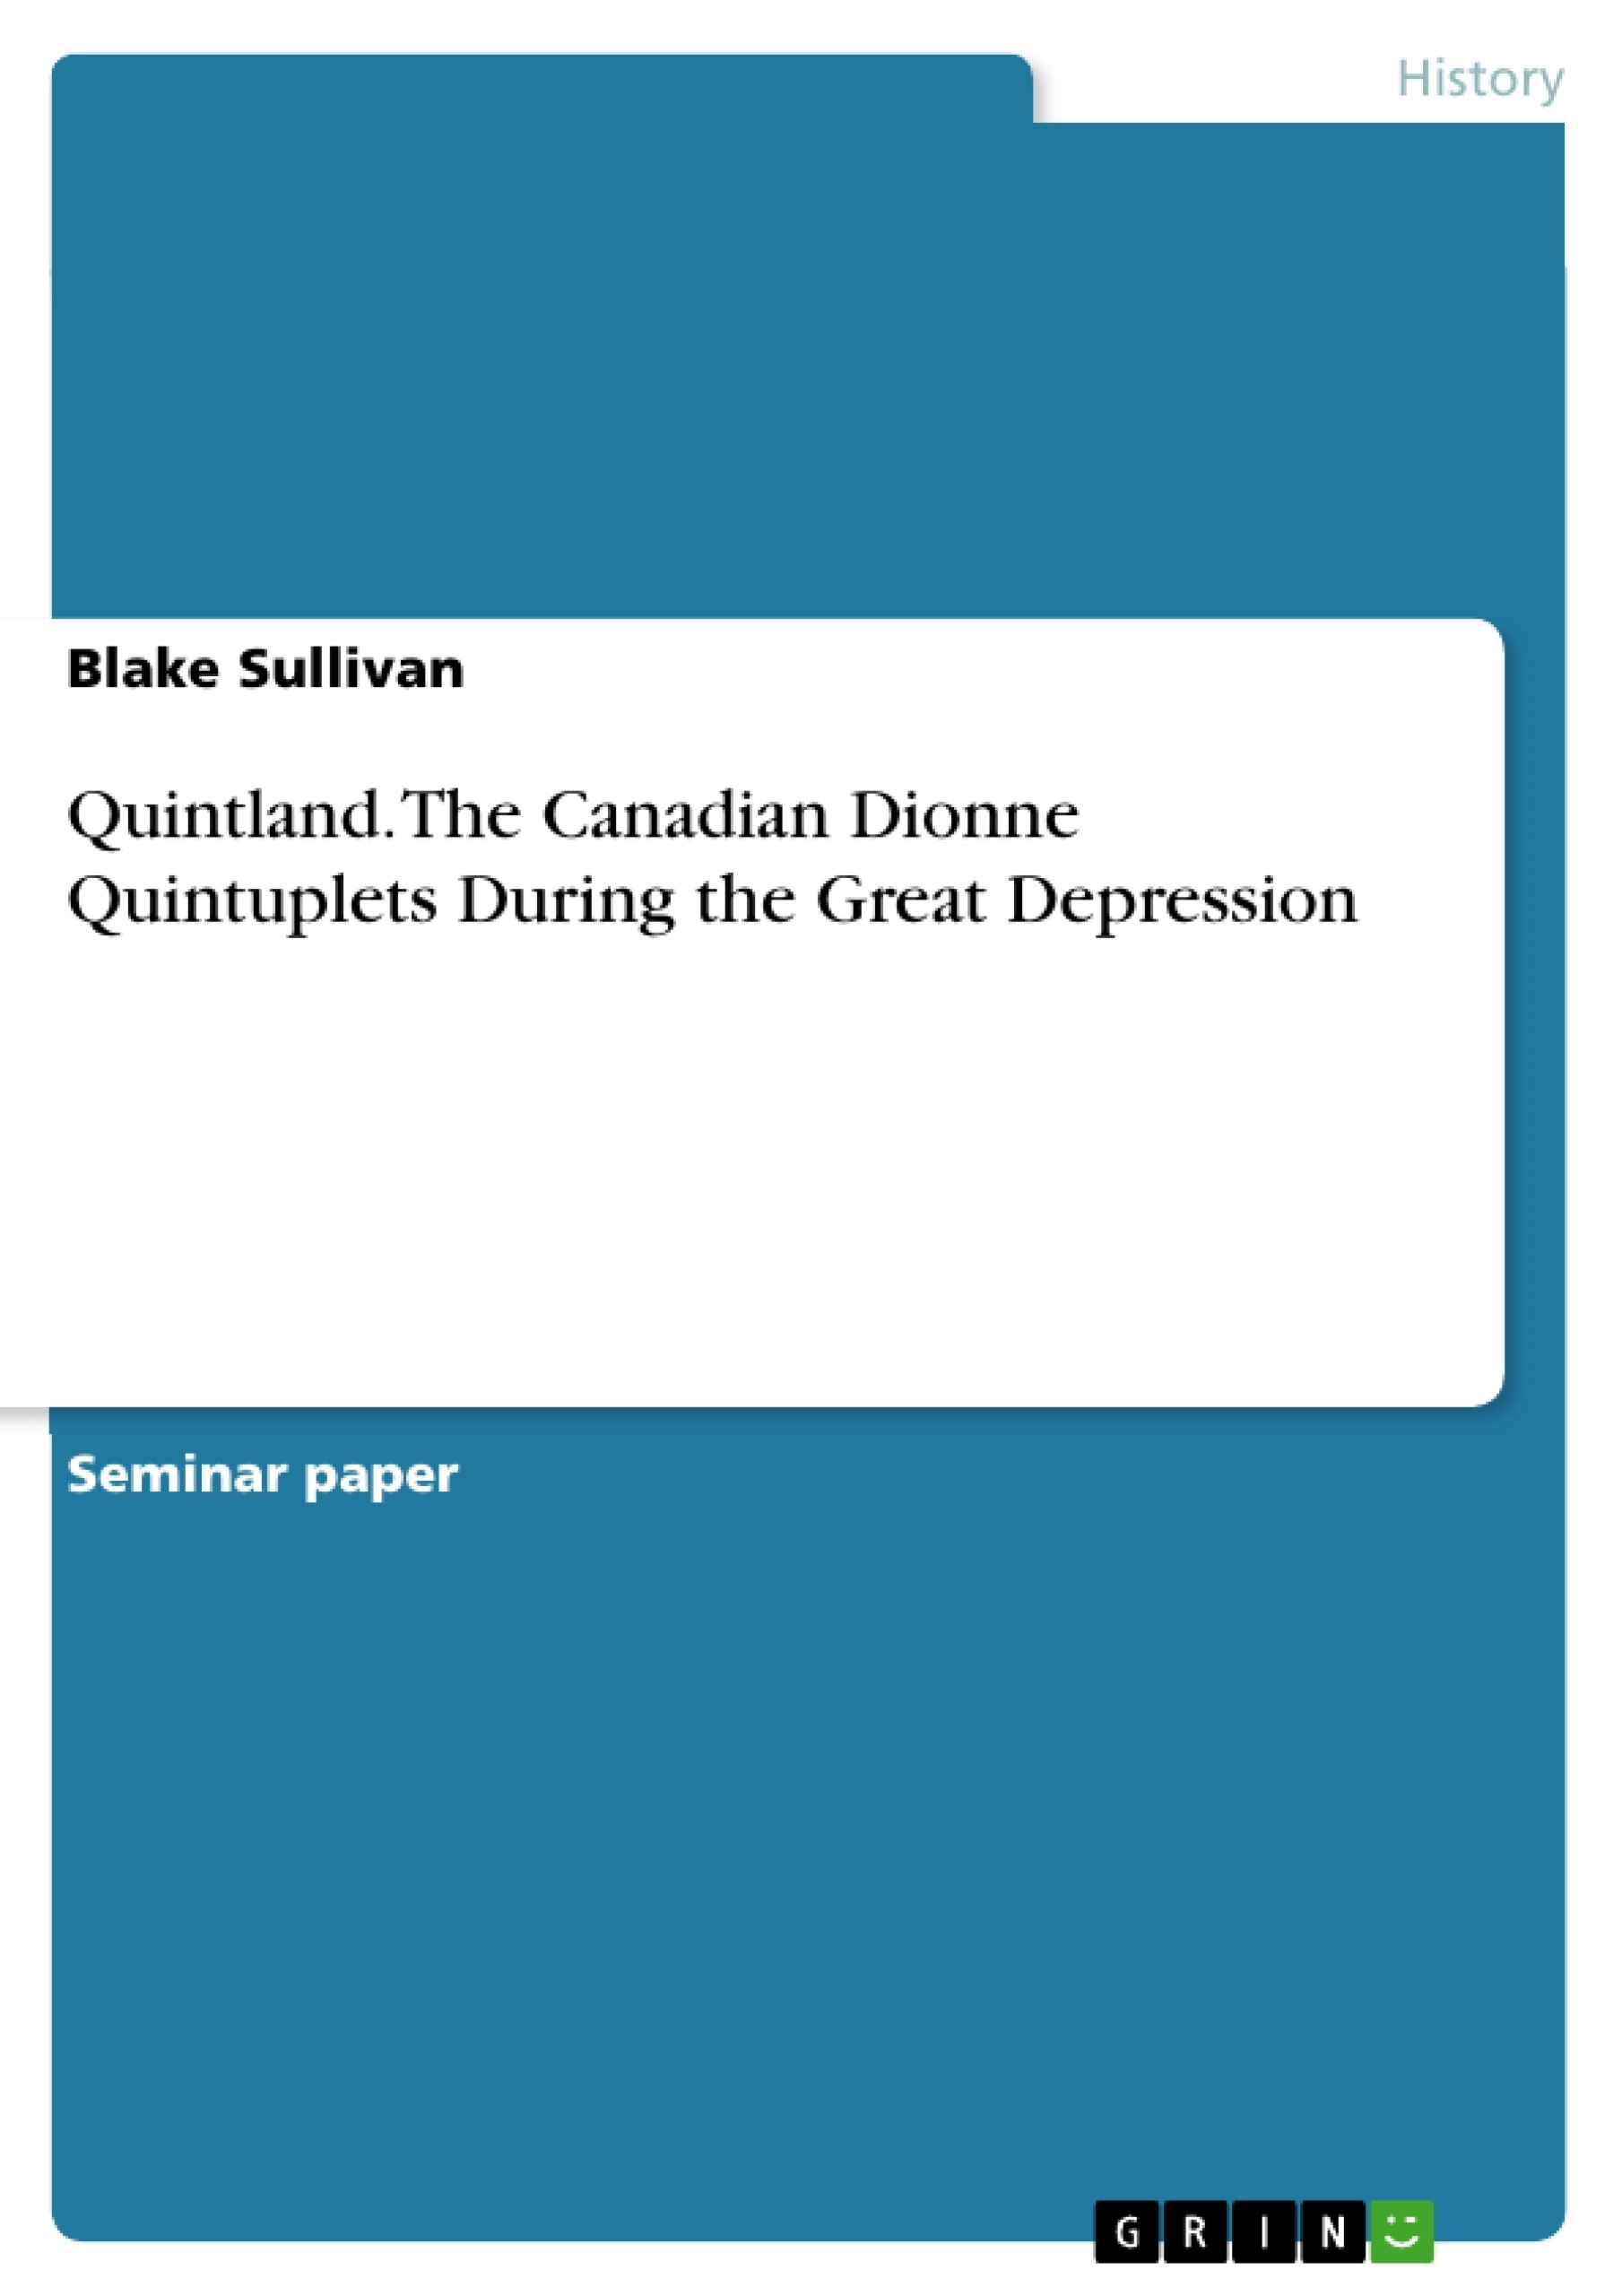 Title: Quintland. The Canadian Dionne Quintuplets During the Great Depression